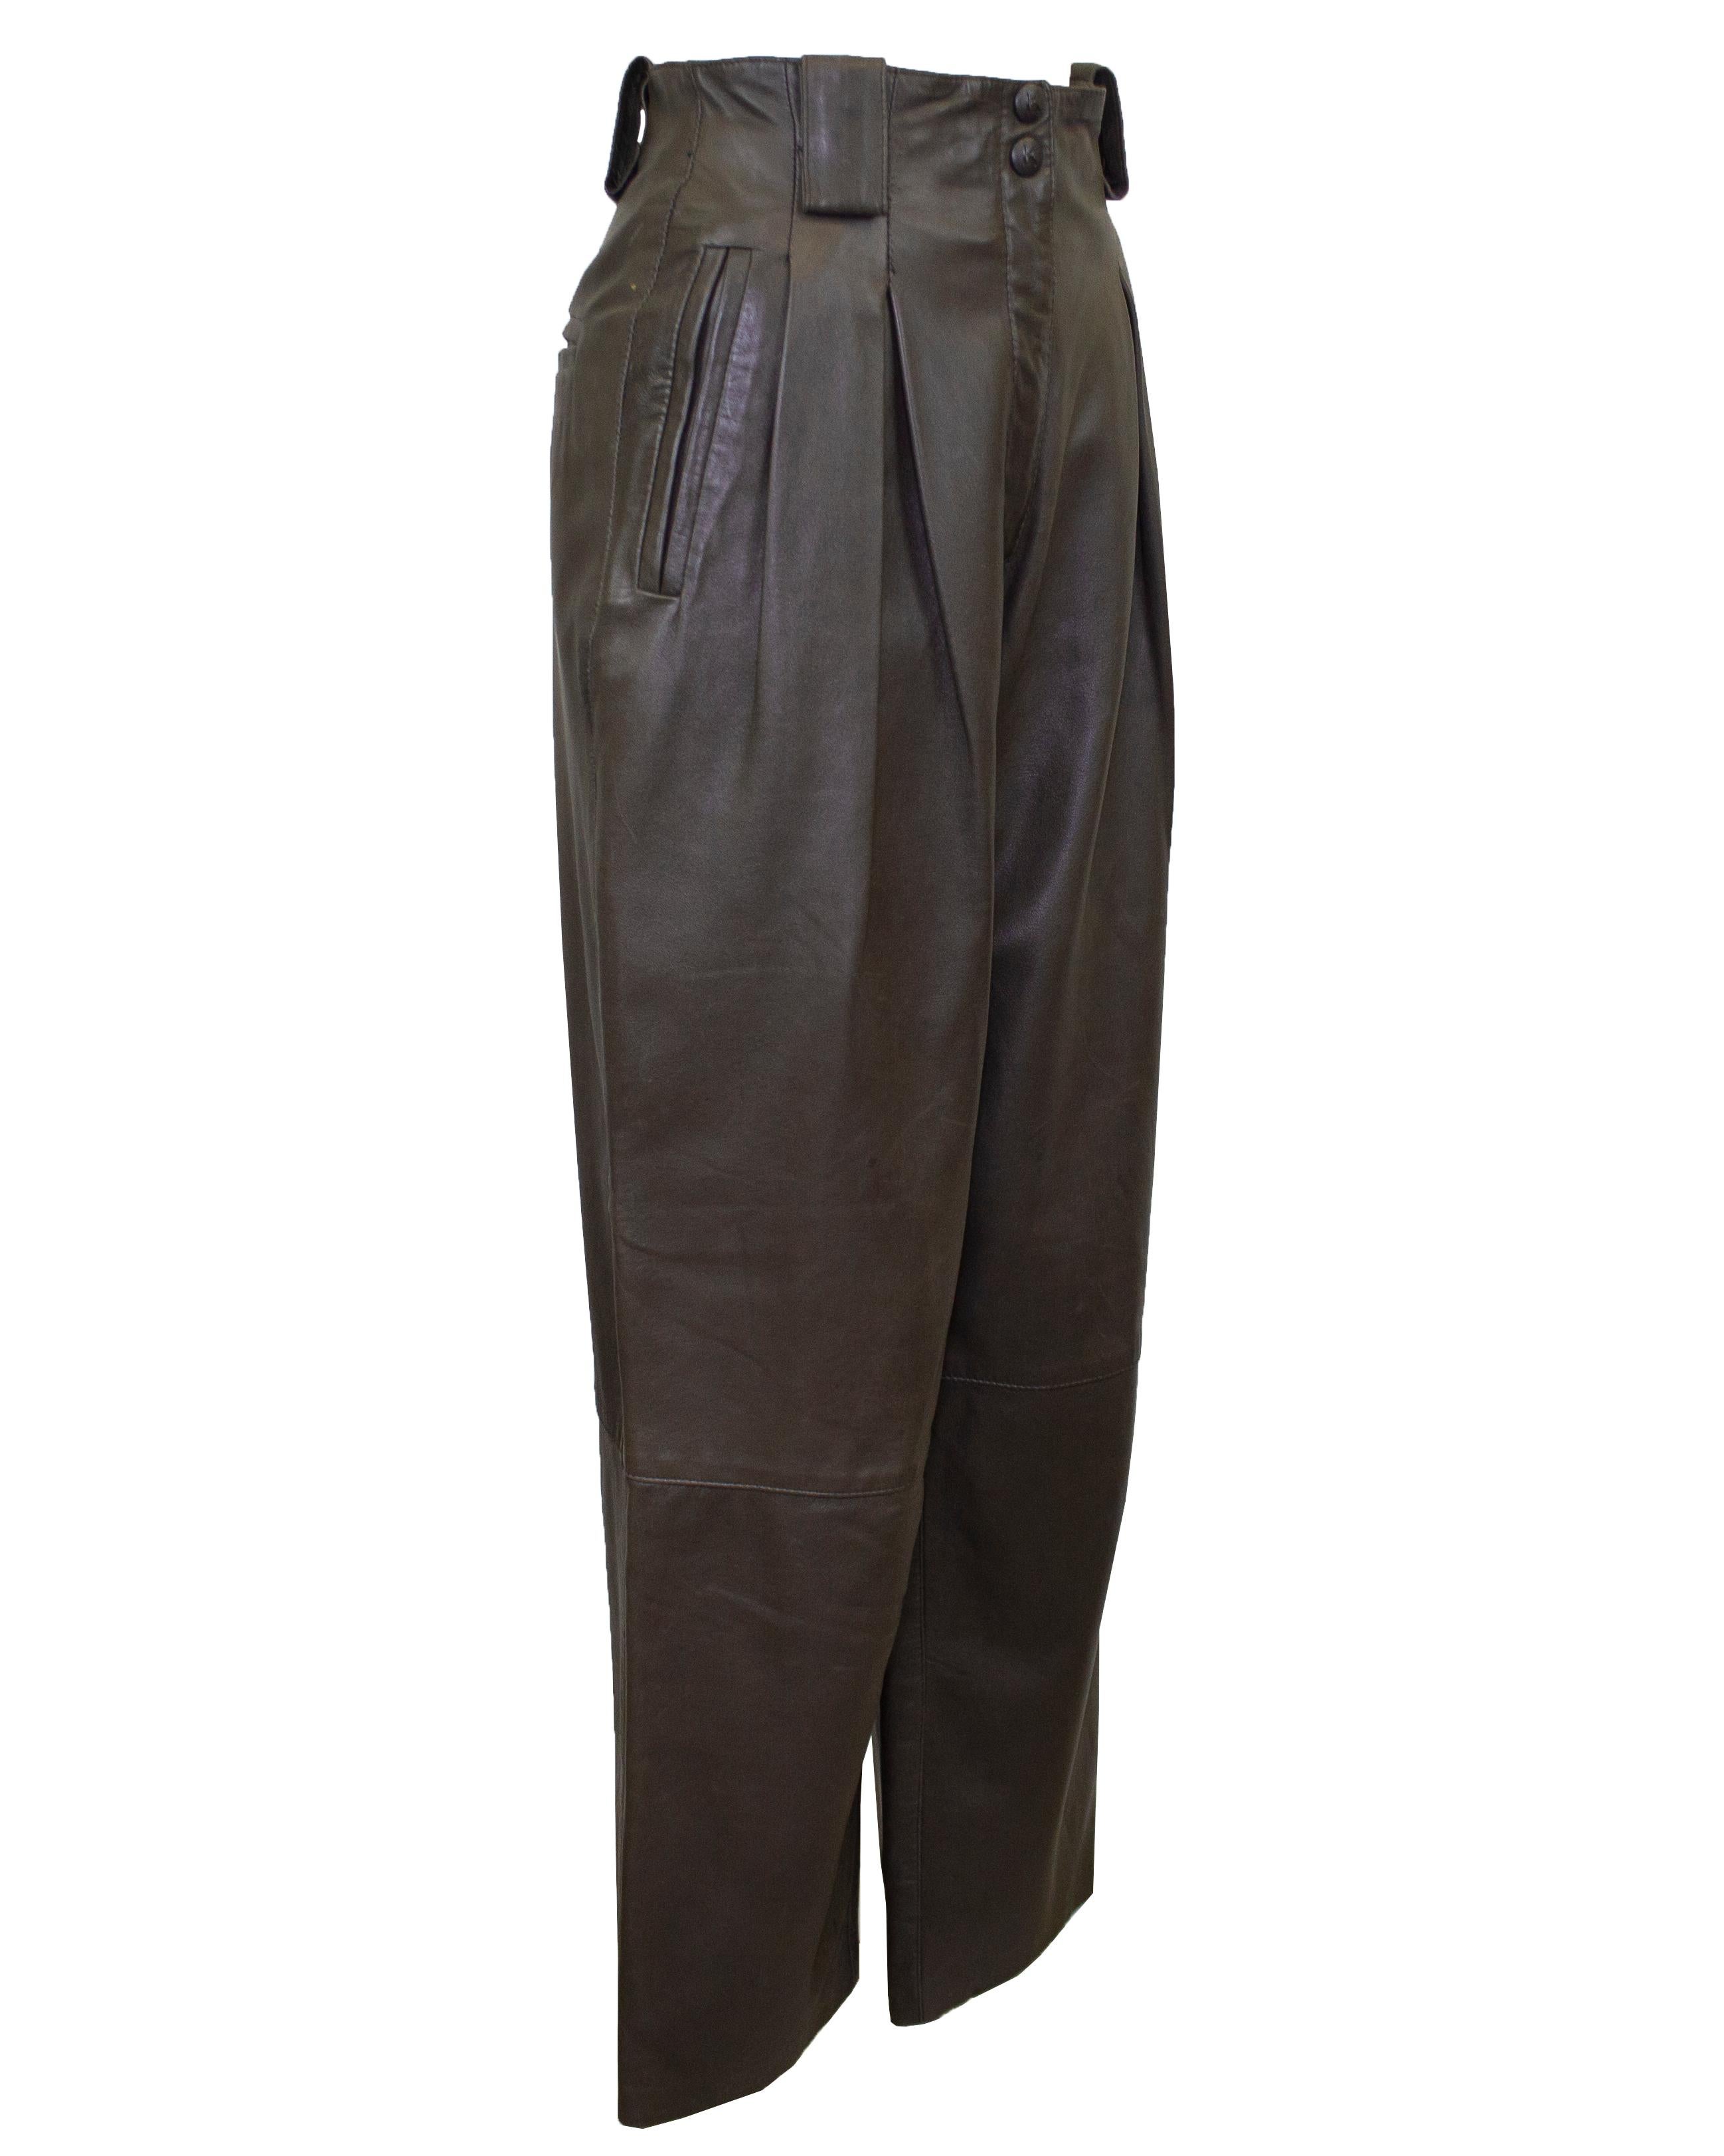 These Krizia leather pants from the 1980s are absolutely fabulous! Butter soft olive green with a great shape. They sit high on the waist with oversized belt loops, a zipper and snap fly. The leg is slightly wide with inverted pleats at the hips and